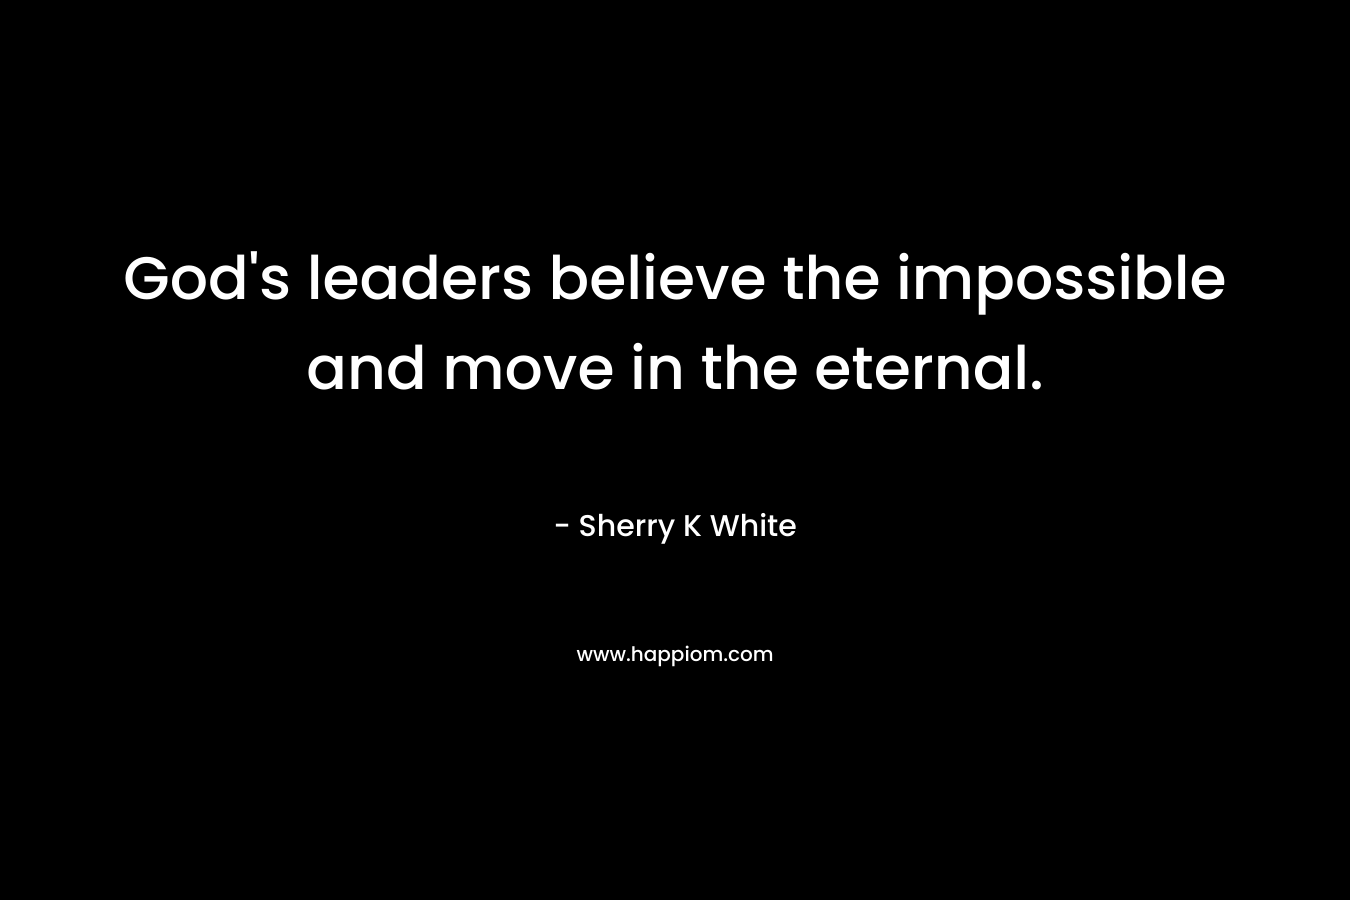 God’s leaders believe the impossible and move in the eternal. – Sherry K White